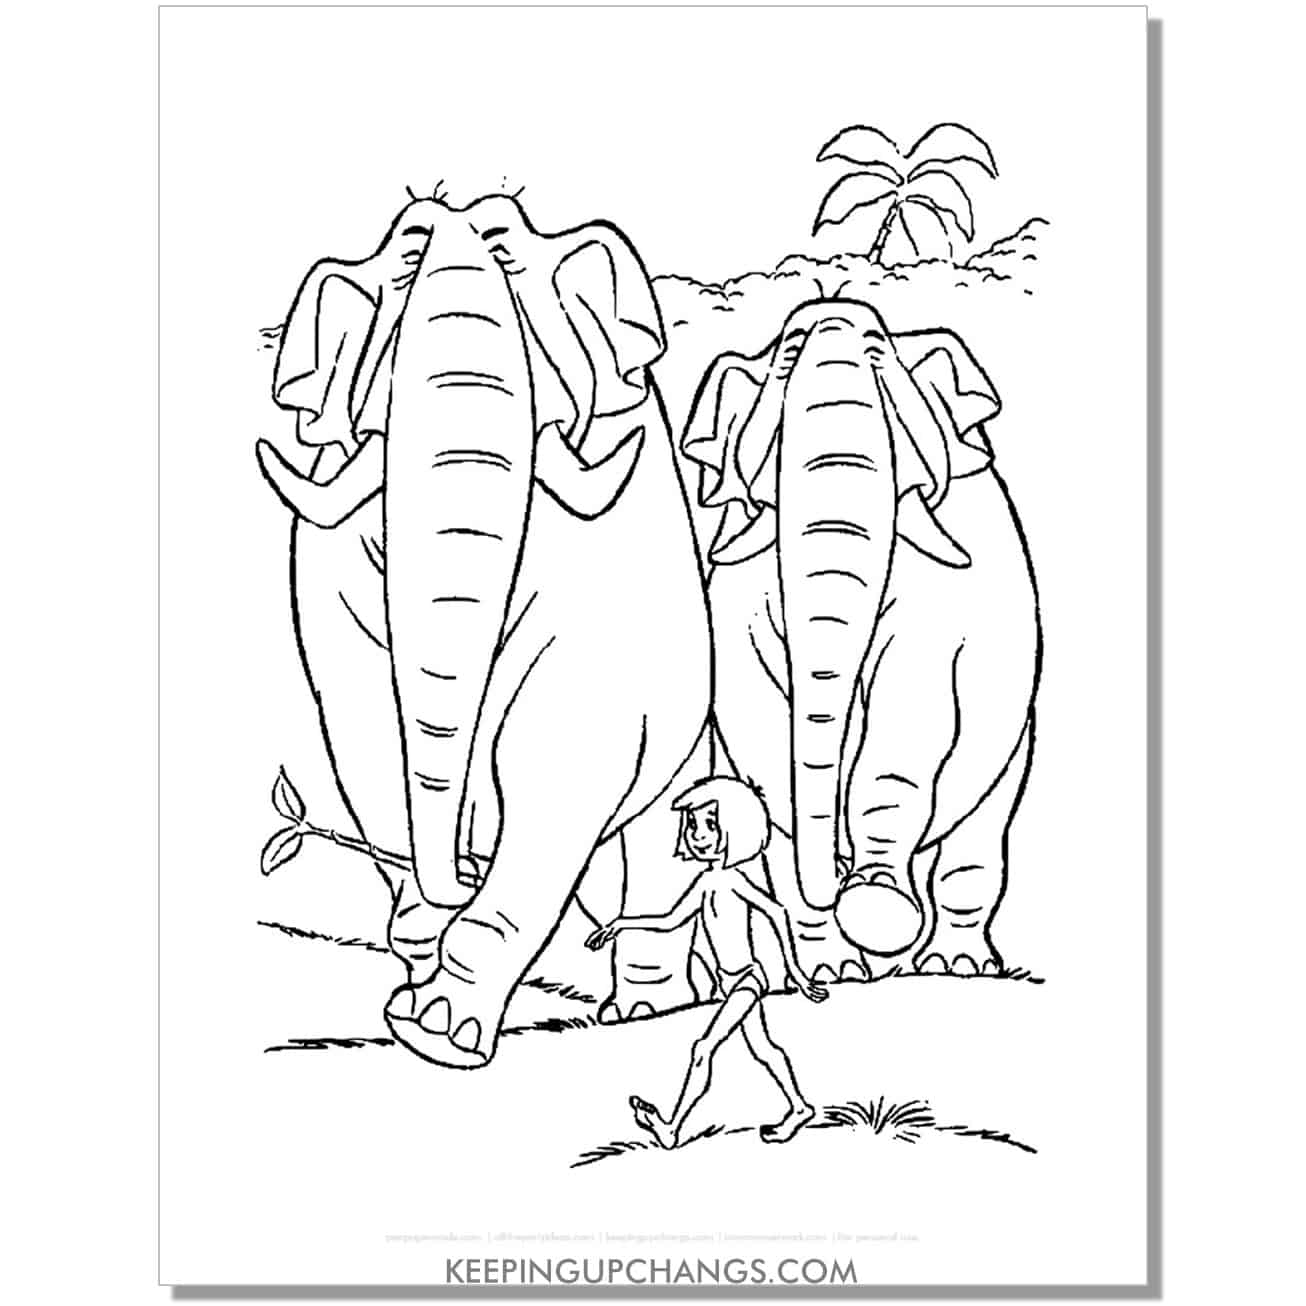 colonel hathi, winifred jungle patrol jungle book coloring page, sheet.